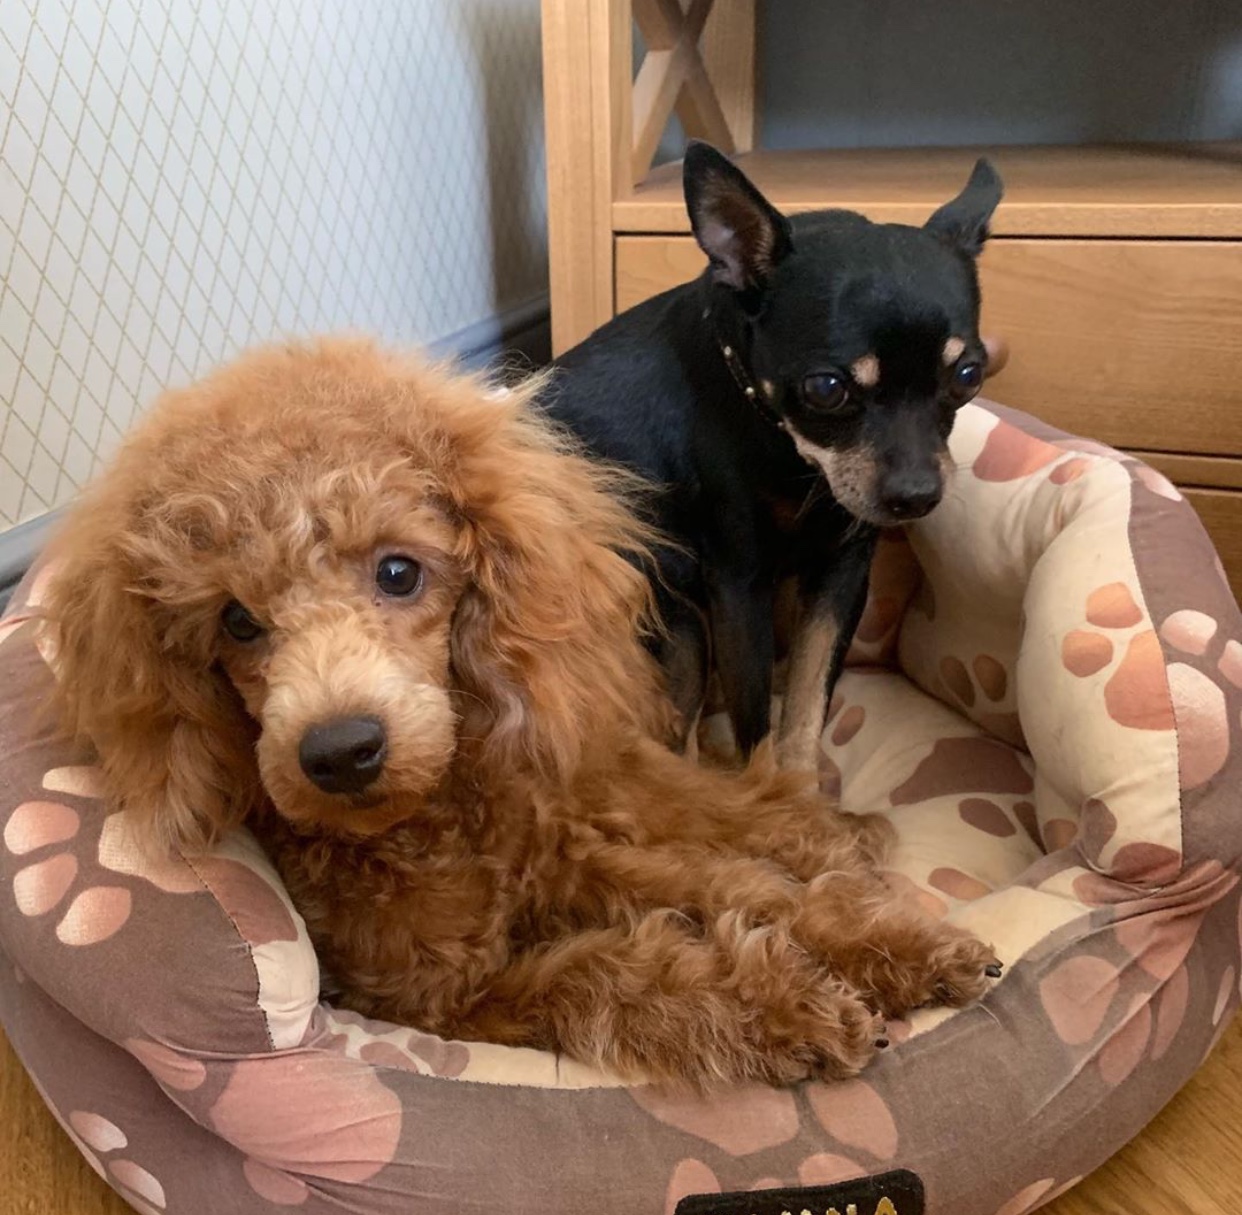 A Poodle lying on its bed next to a chihuahua